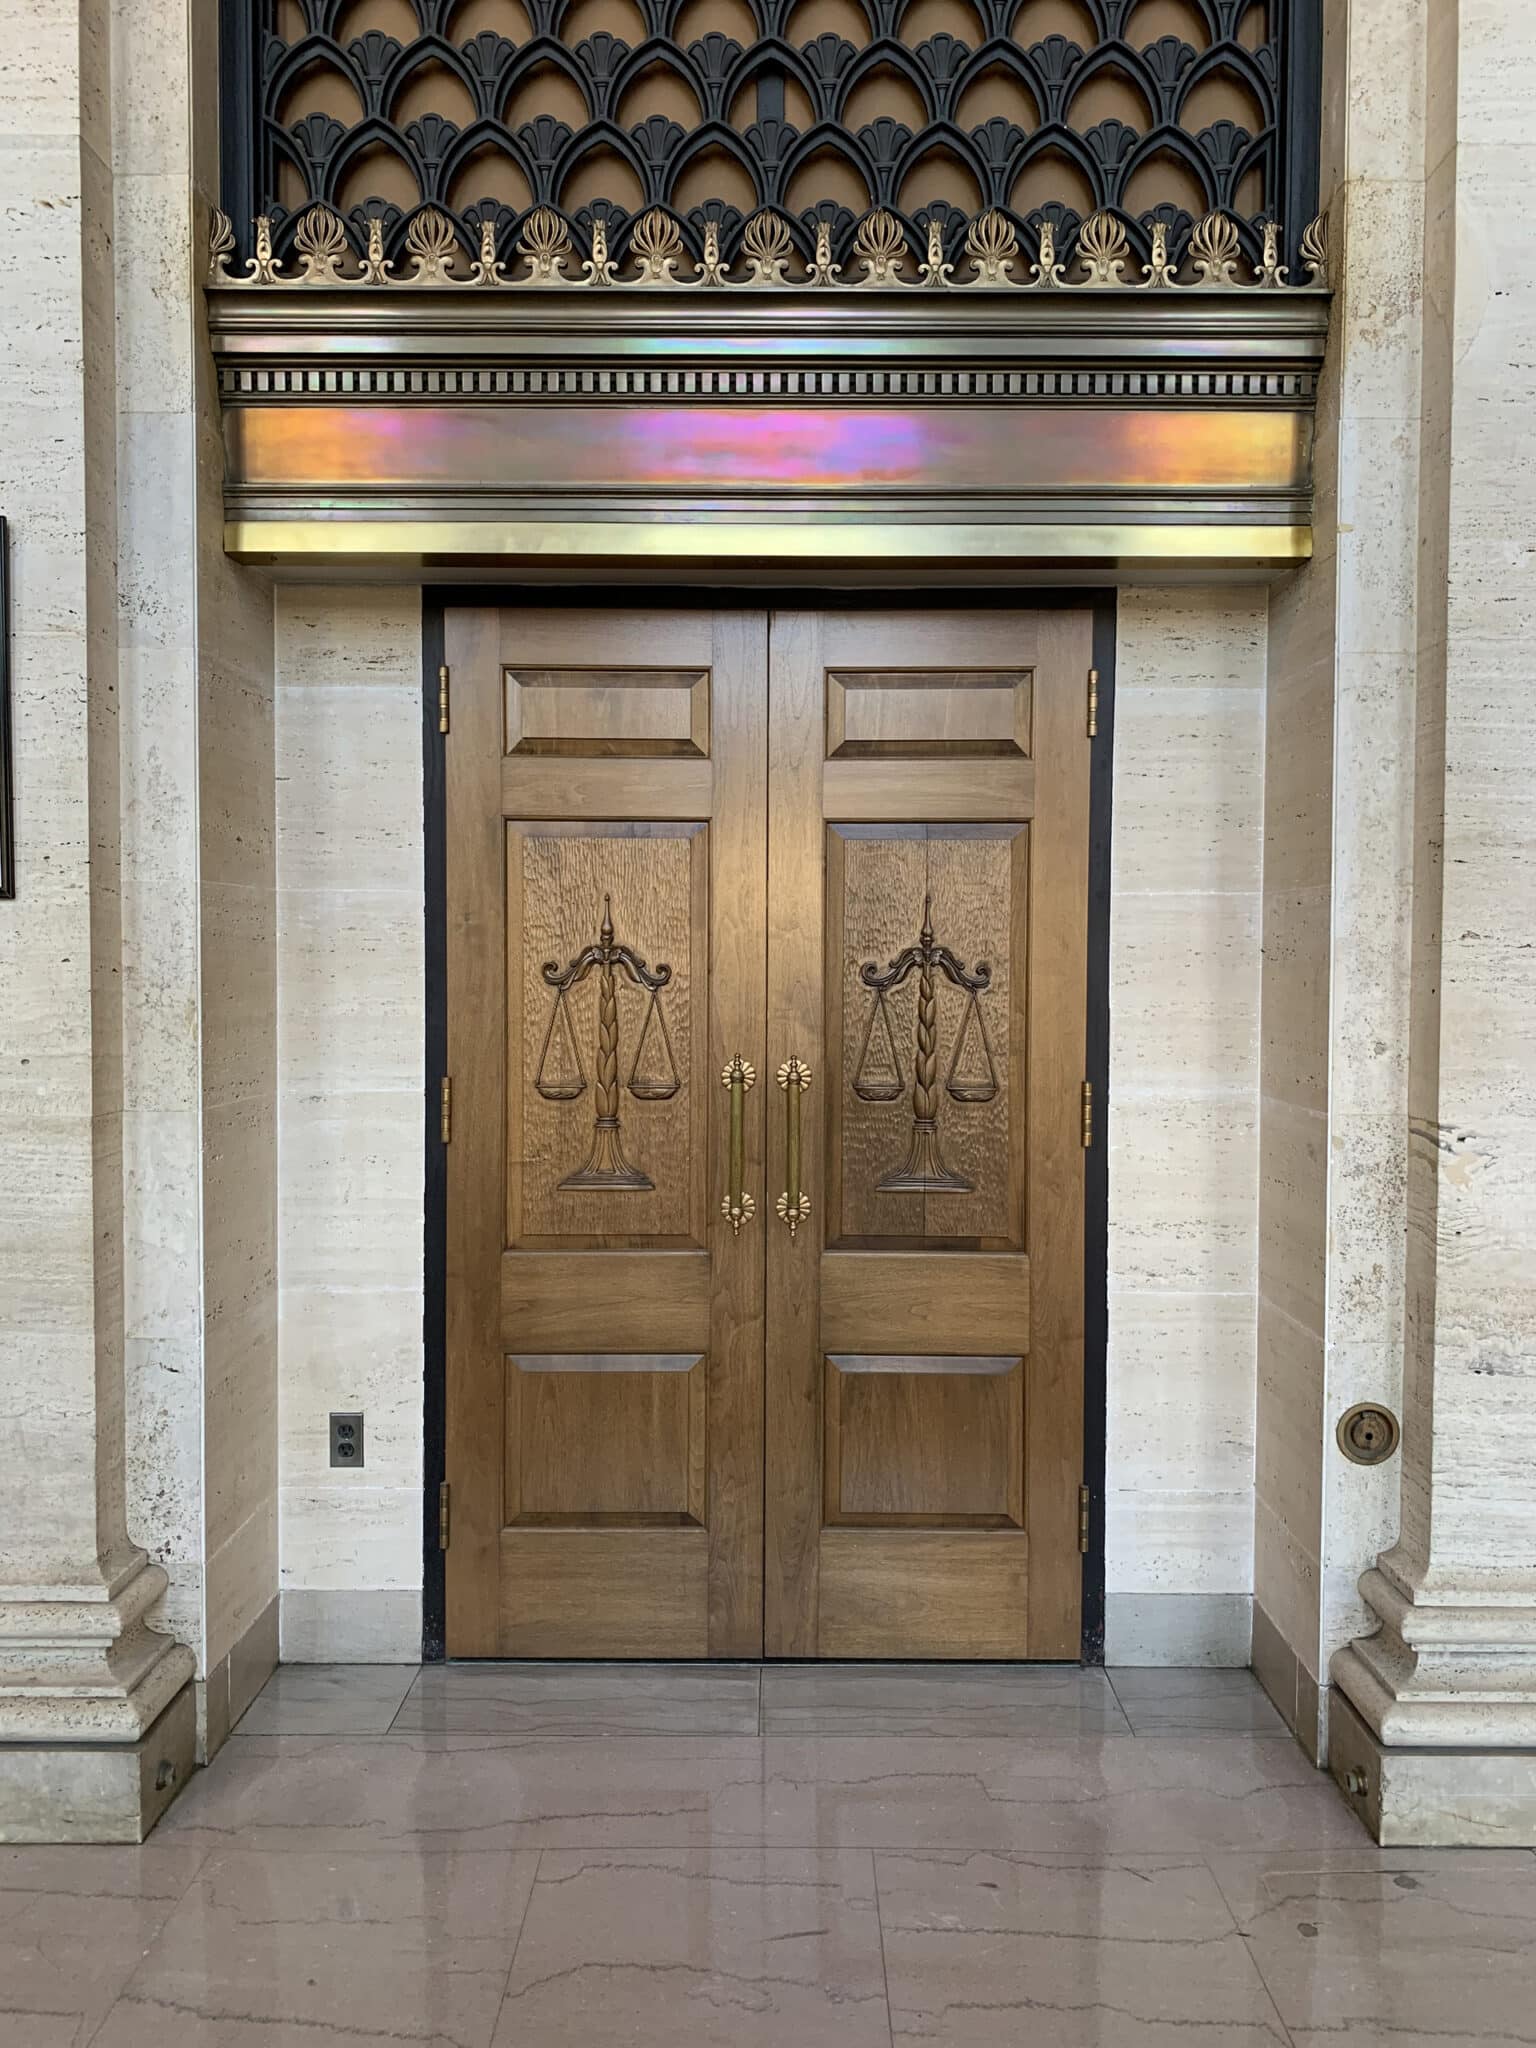 newly renovated courthouse building doors designed by trivers architects in st. louis